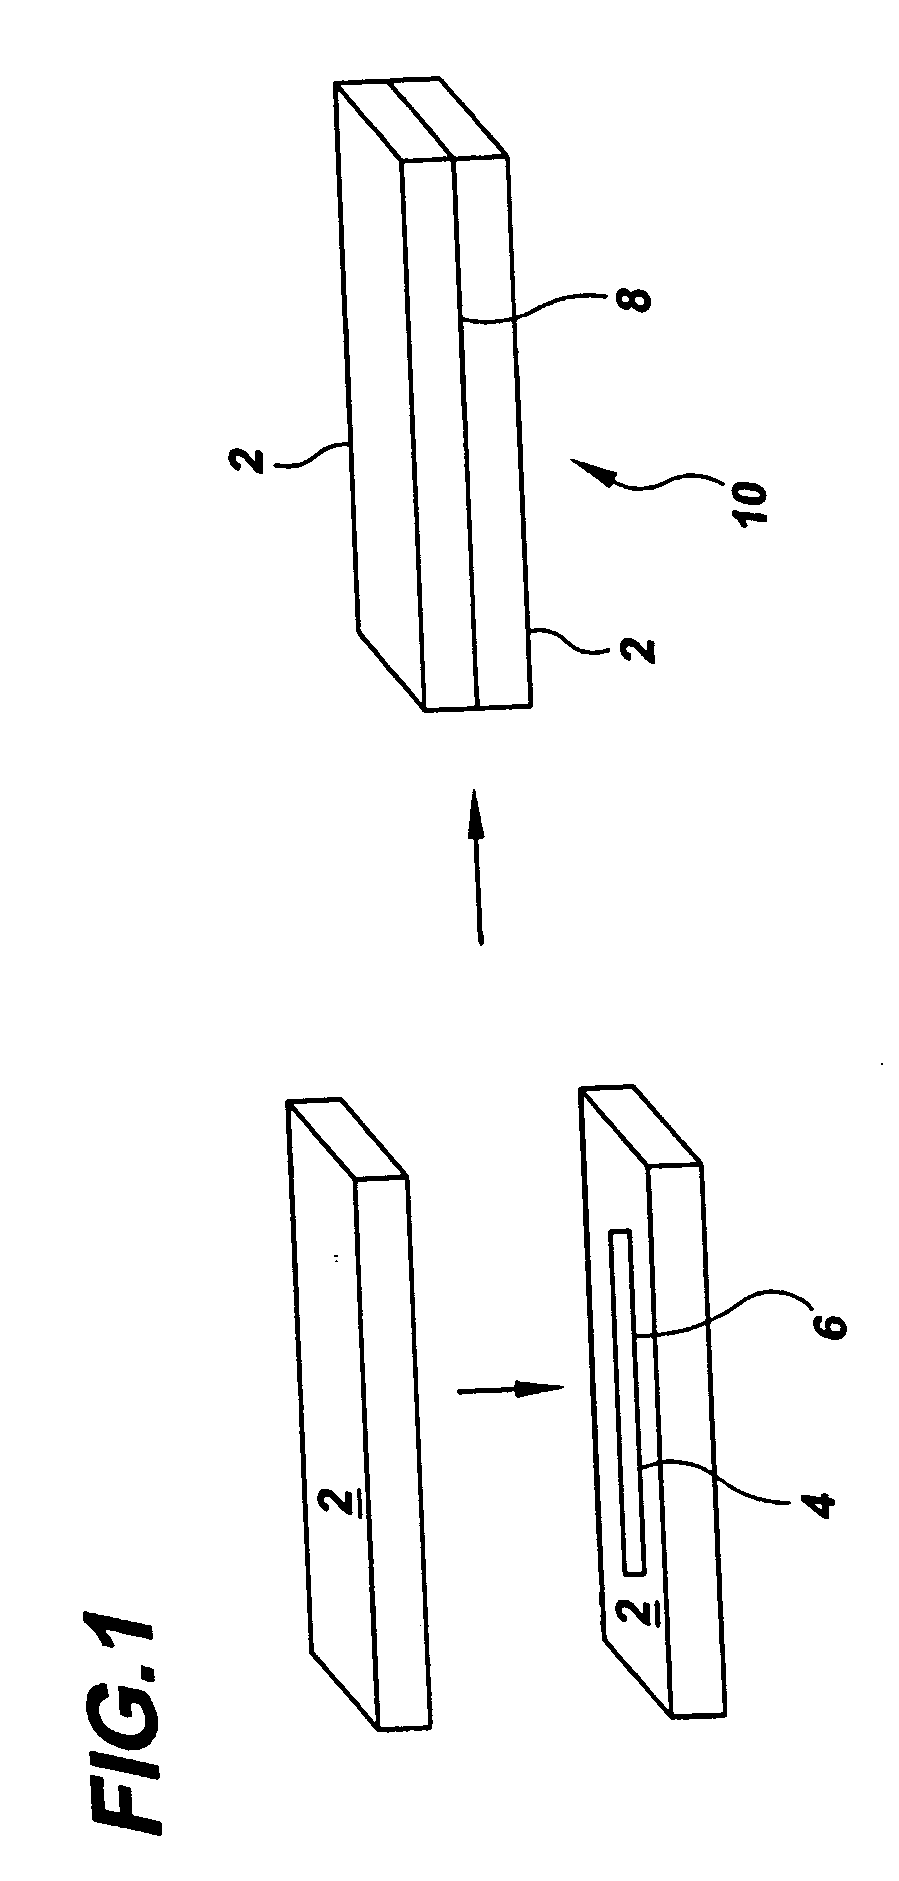 Laminate structural material trim and applications thereof